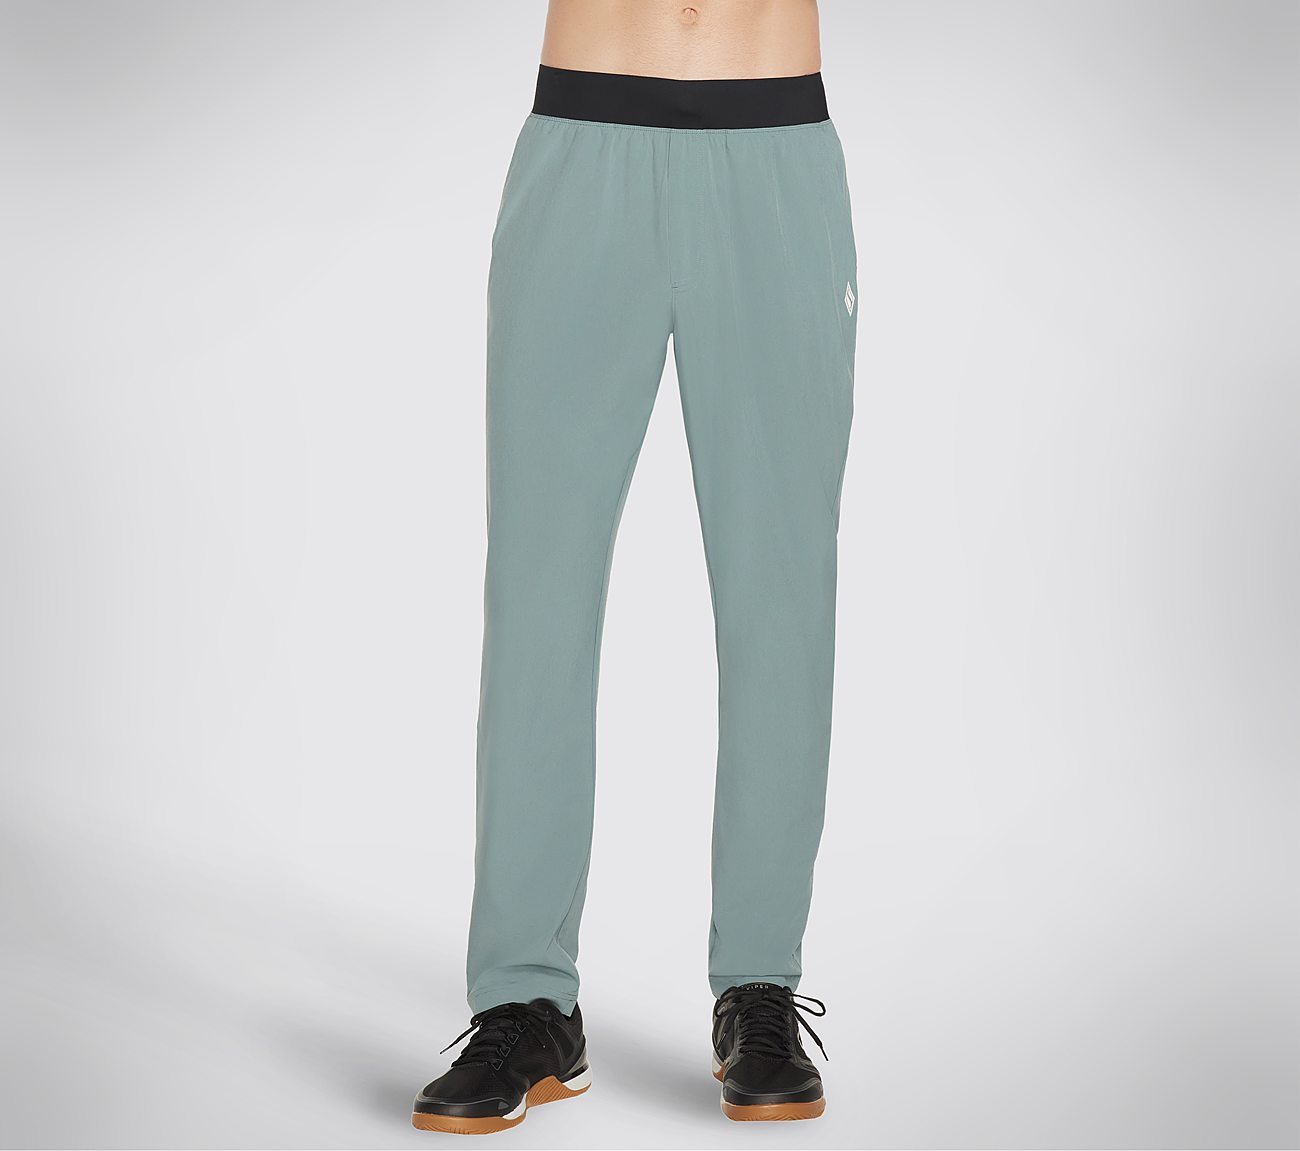 GO WALK ACTION PANT, TEAL/BLUE Apparel Lateral View